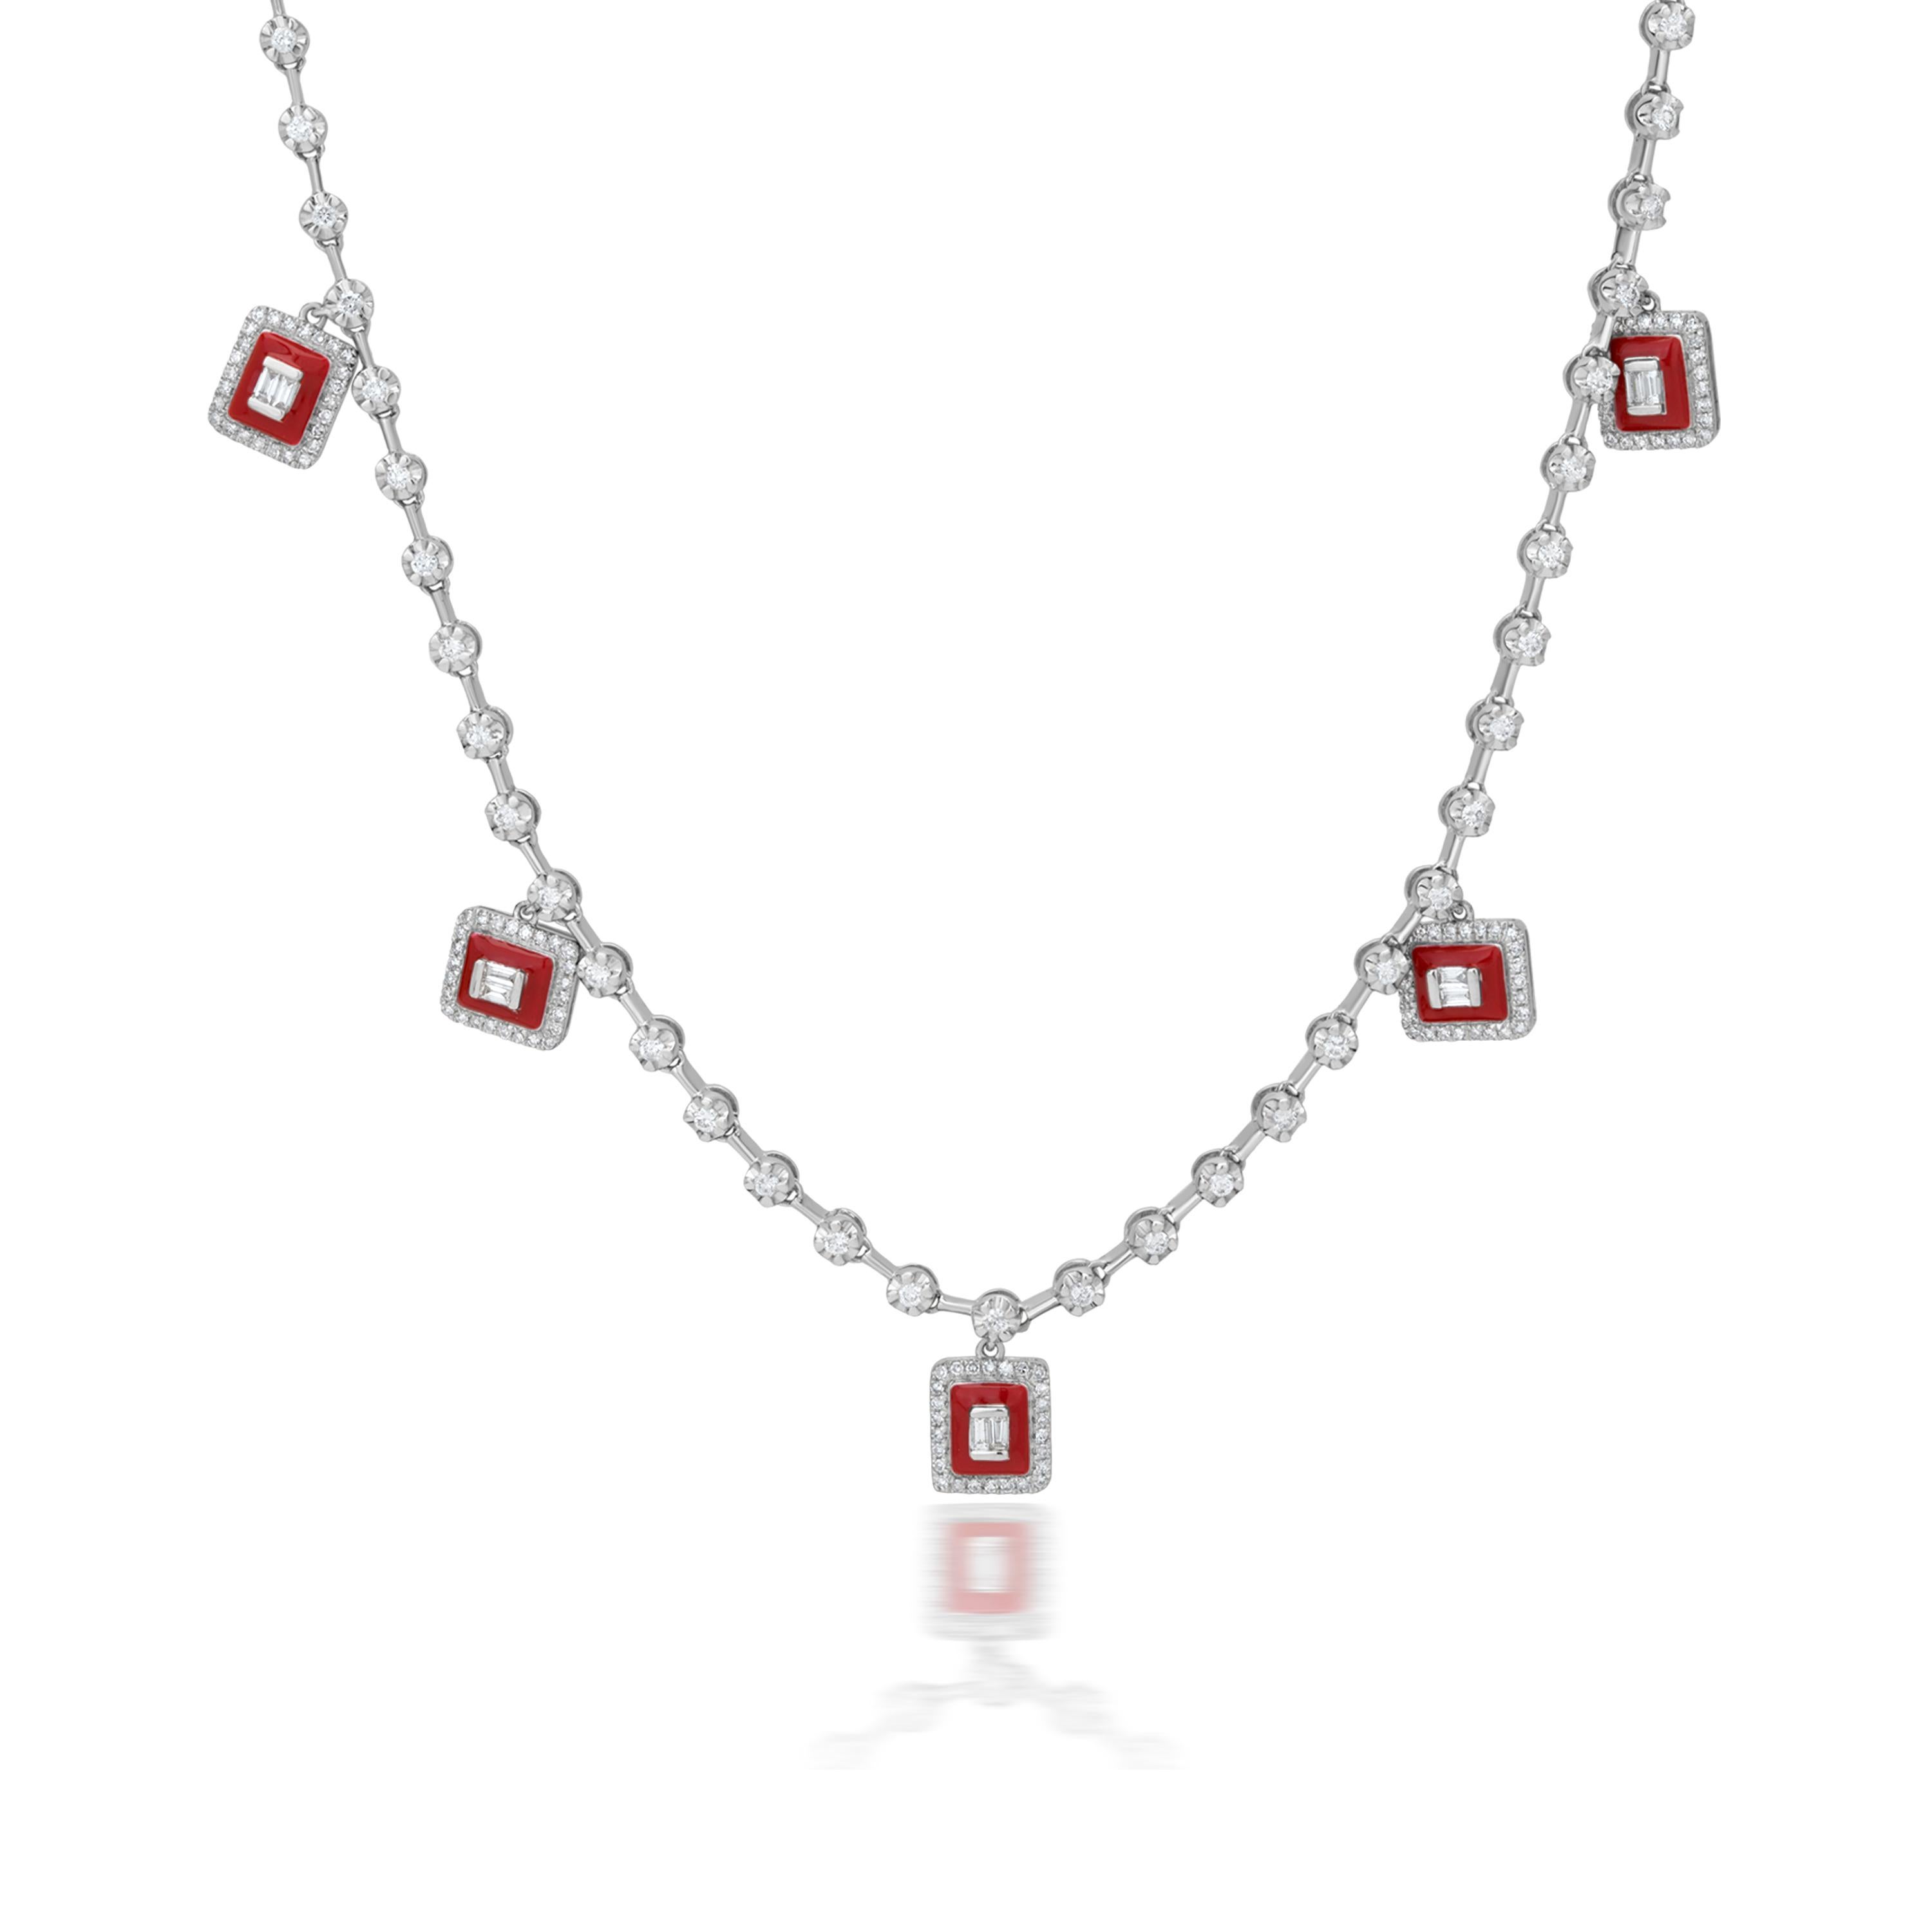 Contemporary Luxle 1ct T.W. Diamond Framed Charm Necklace in 18k White Gold For Sale